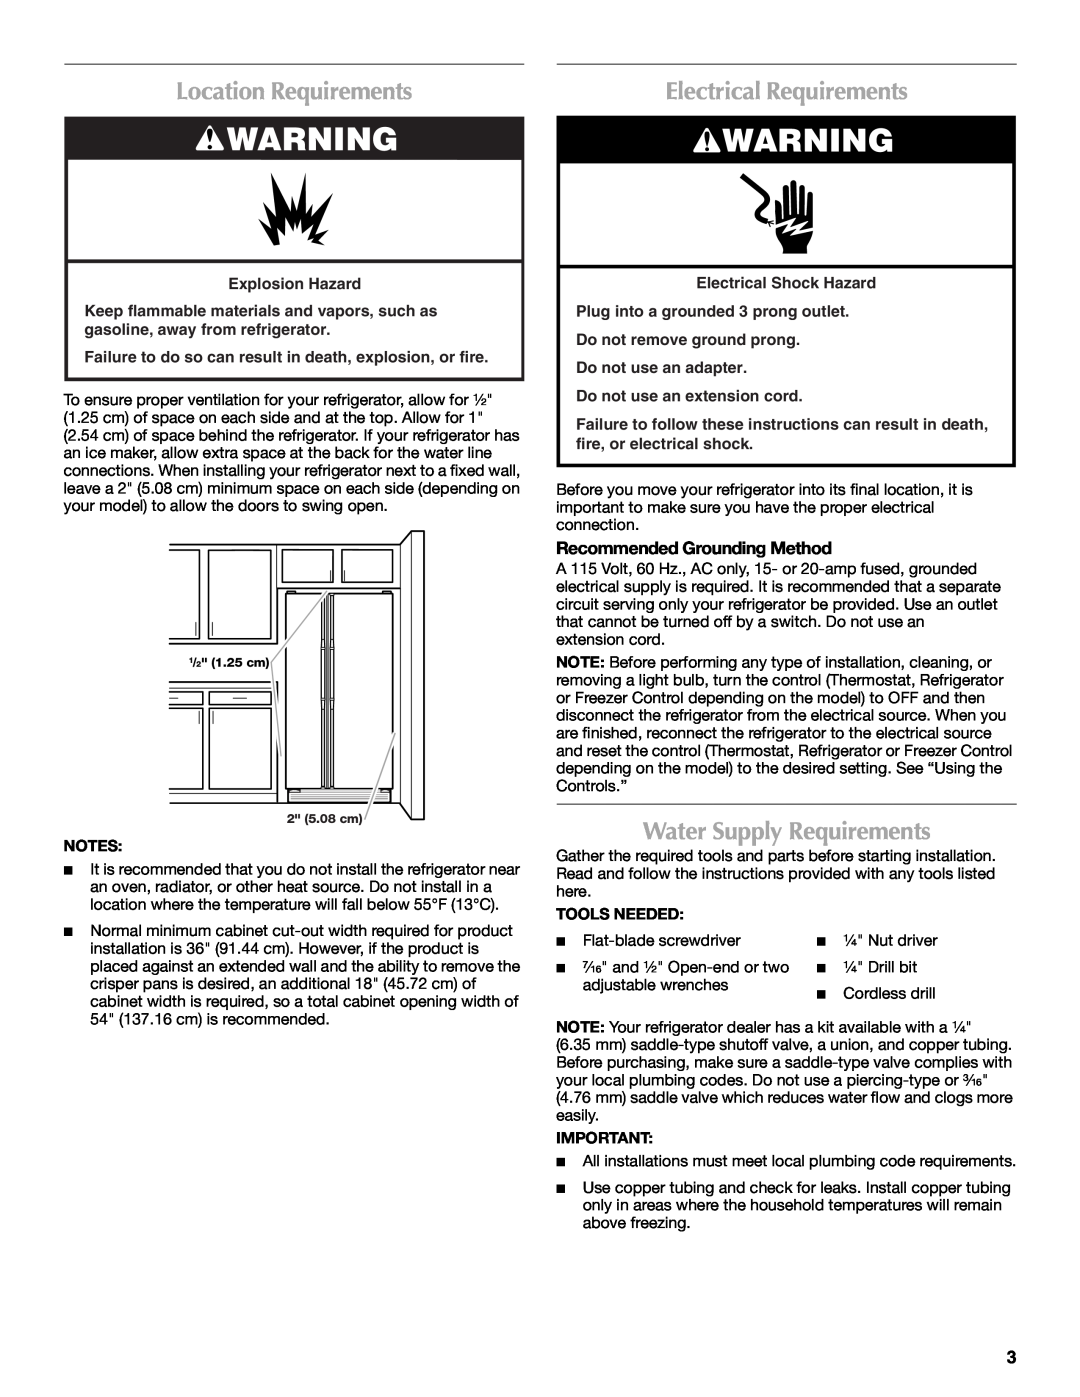 Maytag W10321482A Location Requirements, Electrical Requirements, Water Supply Requirements, Recommended Grounding Method 